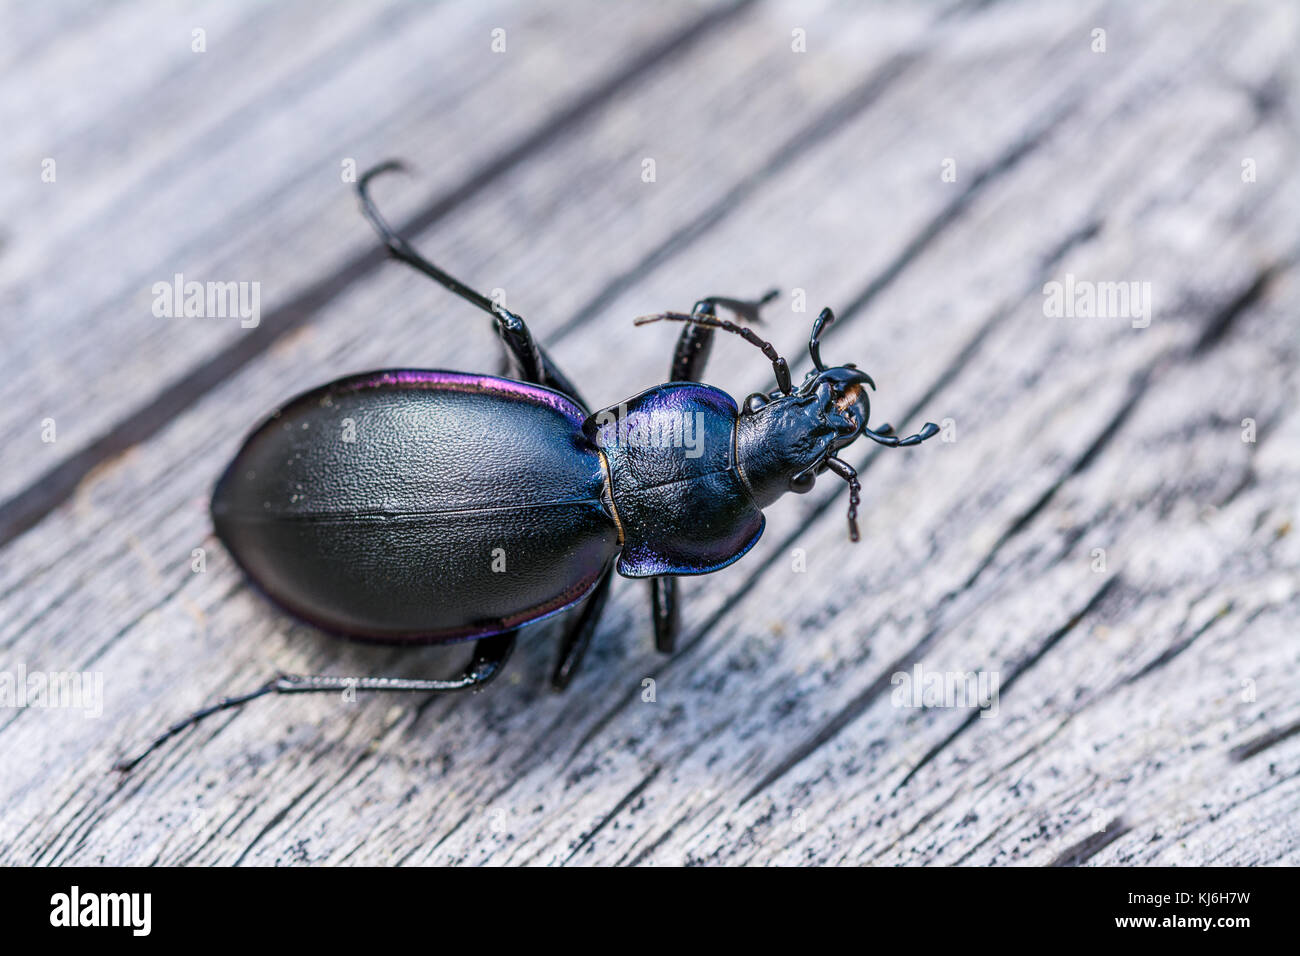 Close-up of dead black beetle. Glossy black ground beetle lifeless on wooden background. Stock Photo